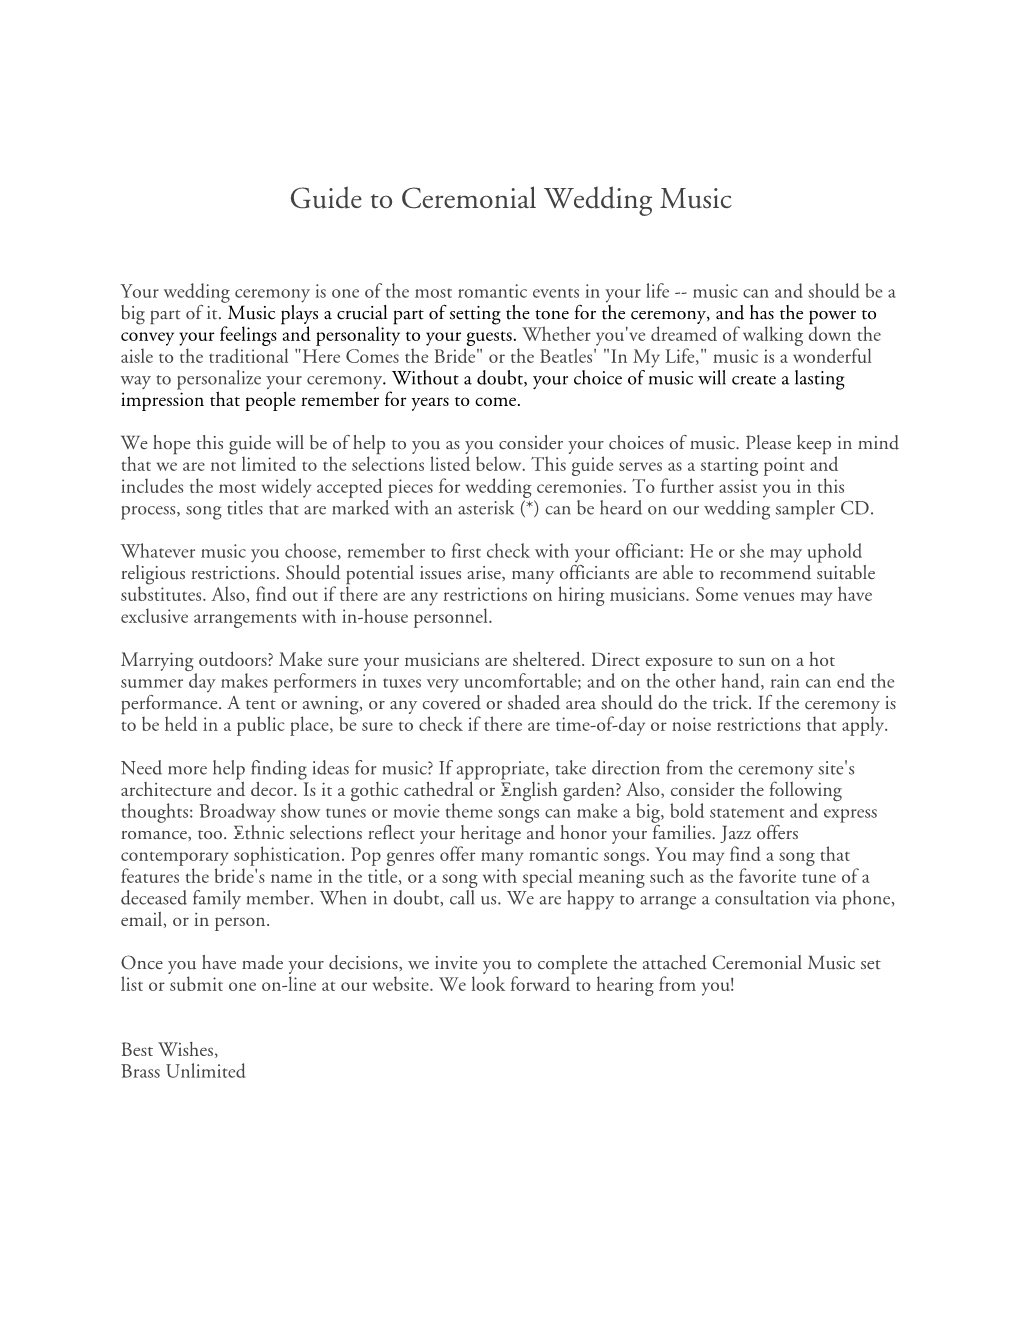 Guide to Ceremonial Wedding Music